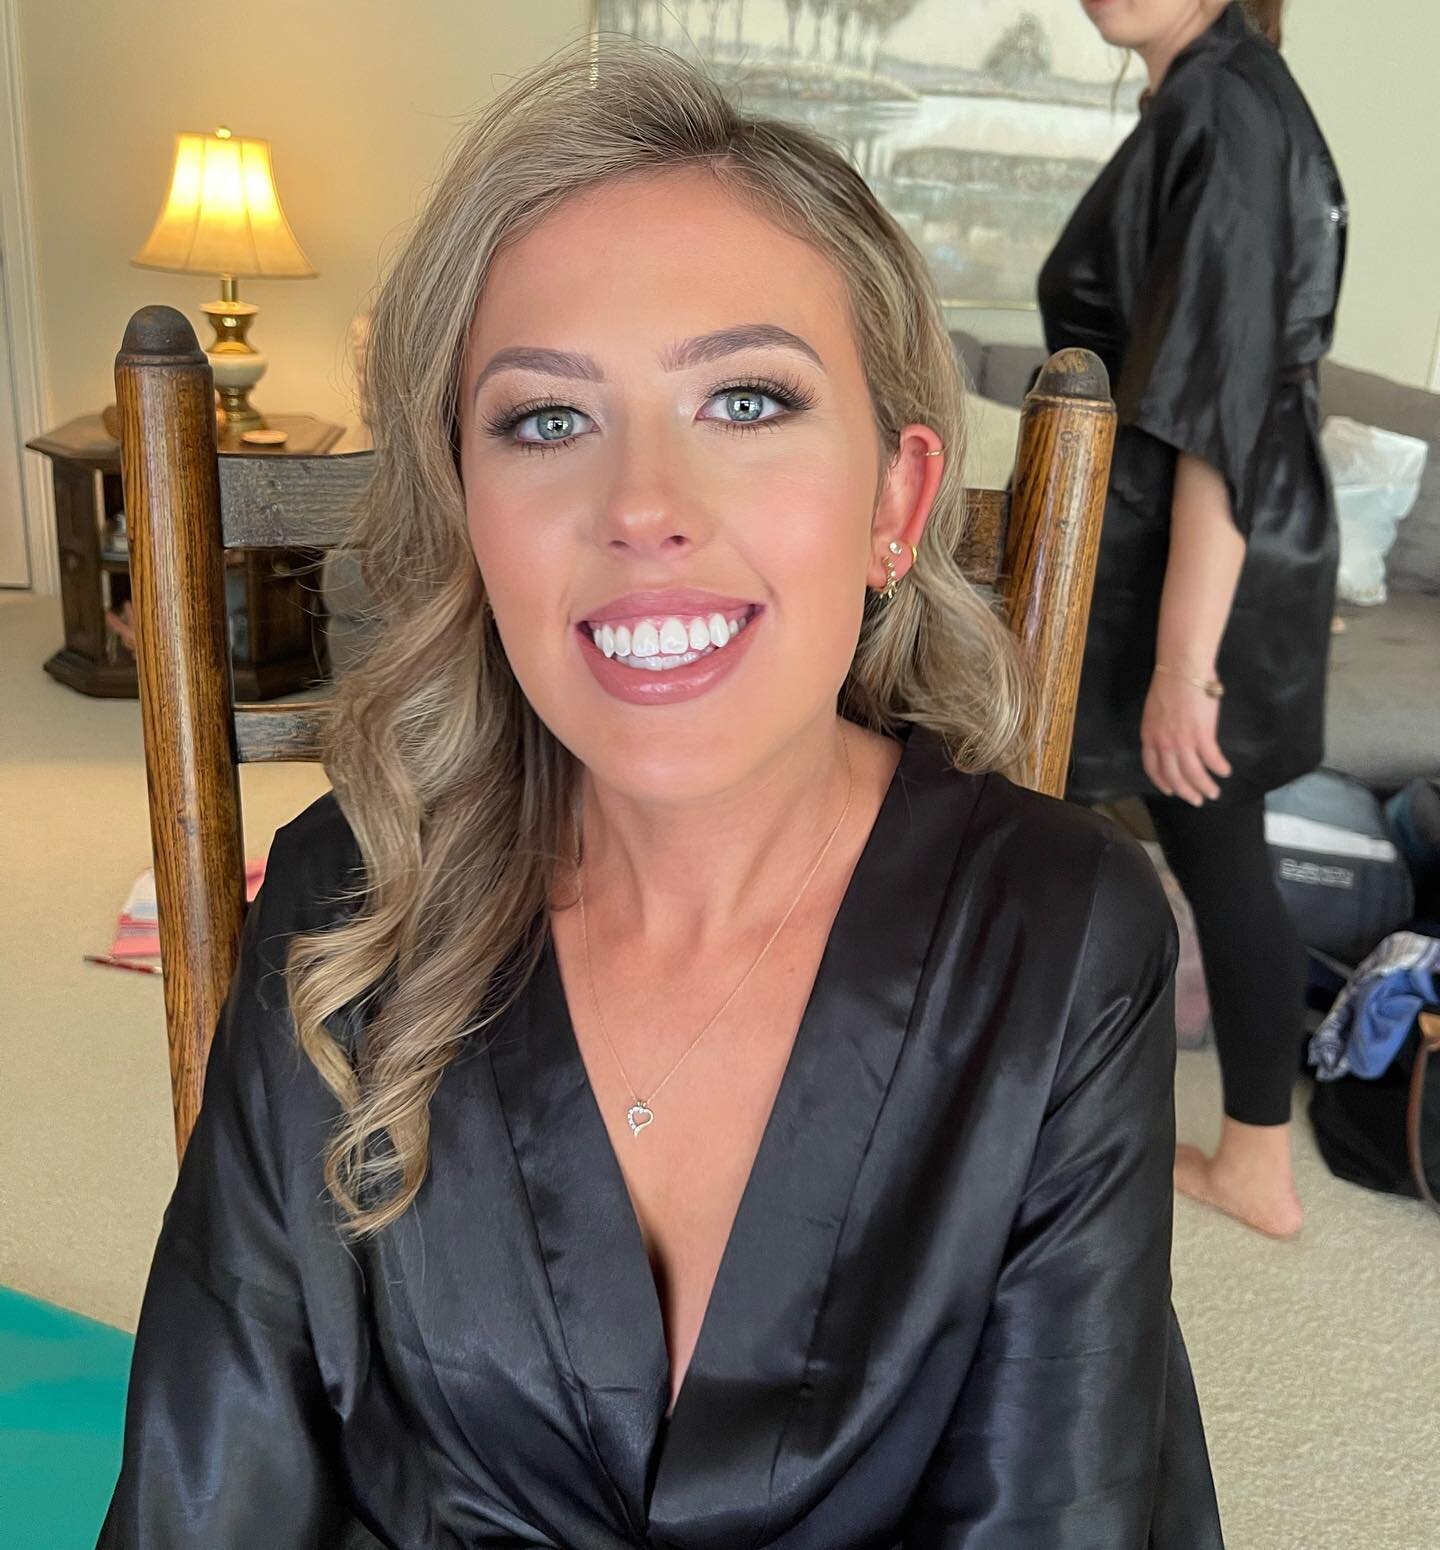 Our signature glowy and glam look ✨ this bridesmaid was such a real life Barbie! 💕
.
Makeup by @alluringcomplexions 
Hair by @glambyraquel 
On behalf of @lilly_artistry 💕